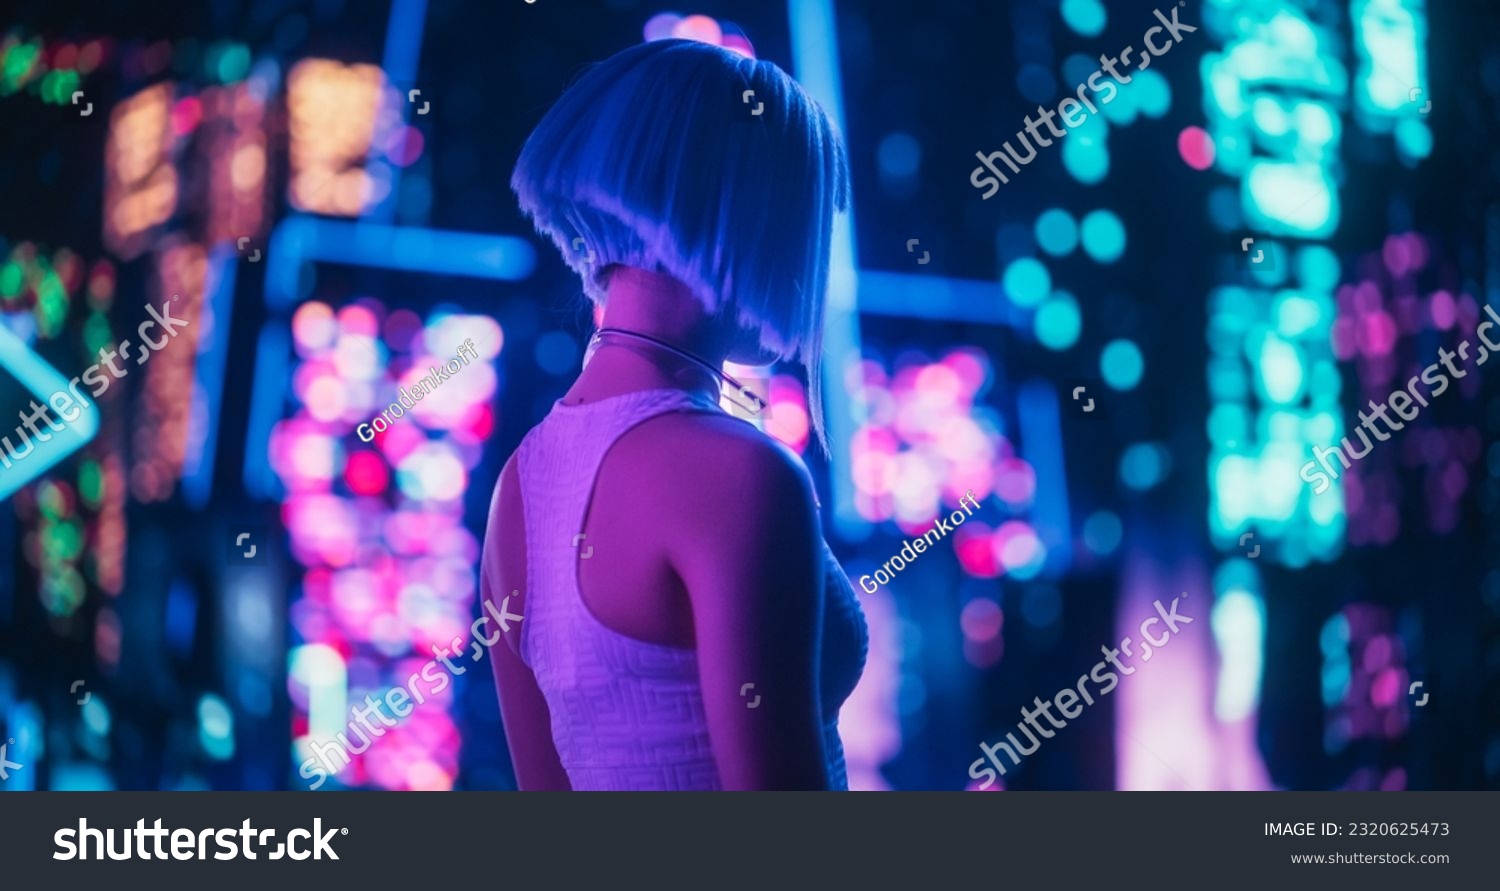 Beautiful Retro-Futuristic Portrait of a Human Gamer Girl Resembling an Android Robot with Artificial Intelligence, Travelling in Modern City with Neon Lights and Colorful Cyberpunk Vibe #2320625473